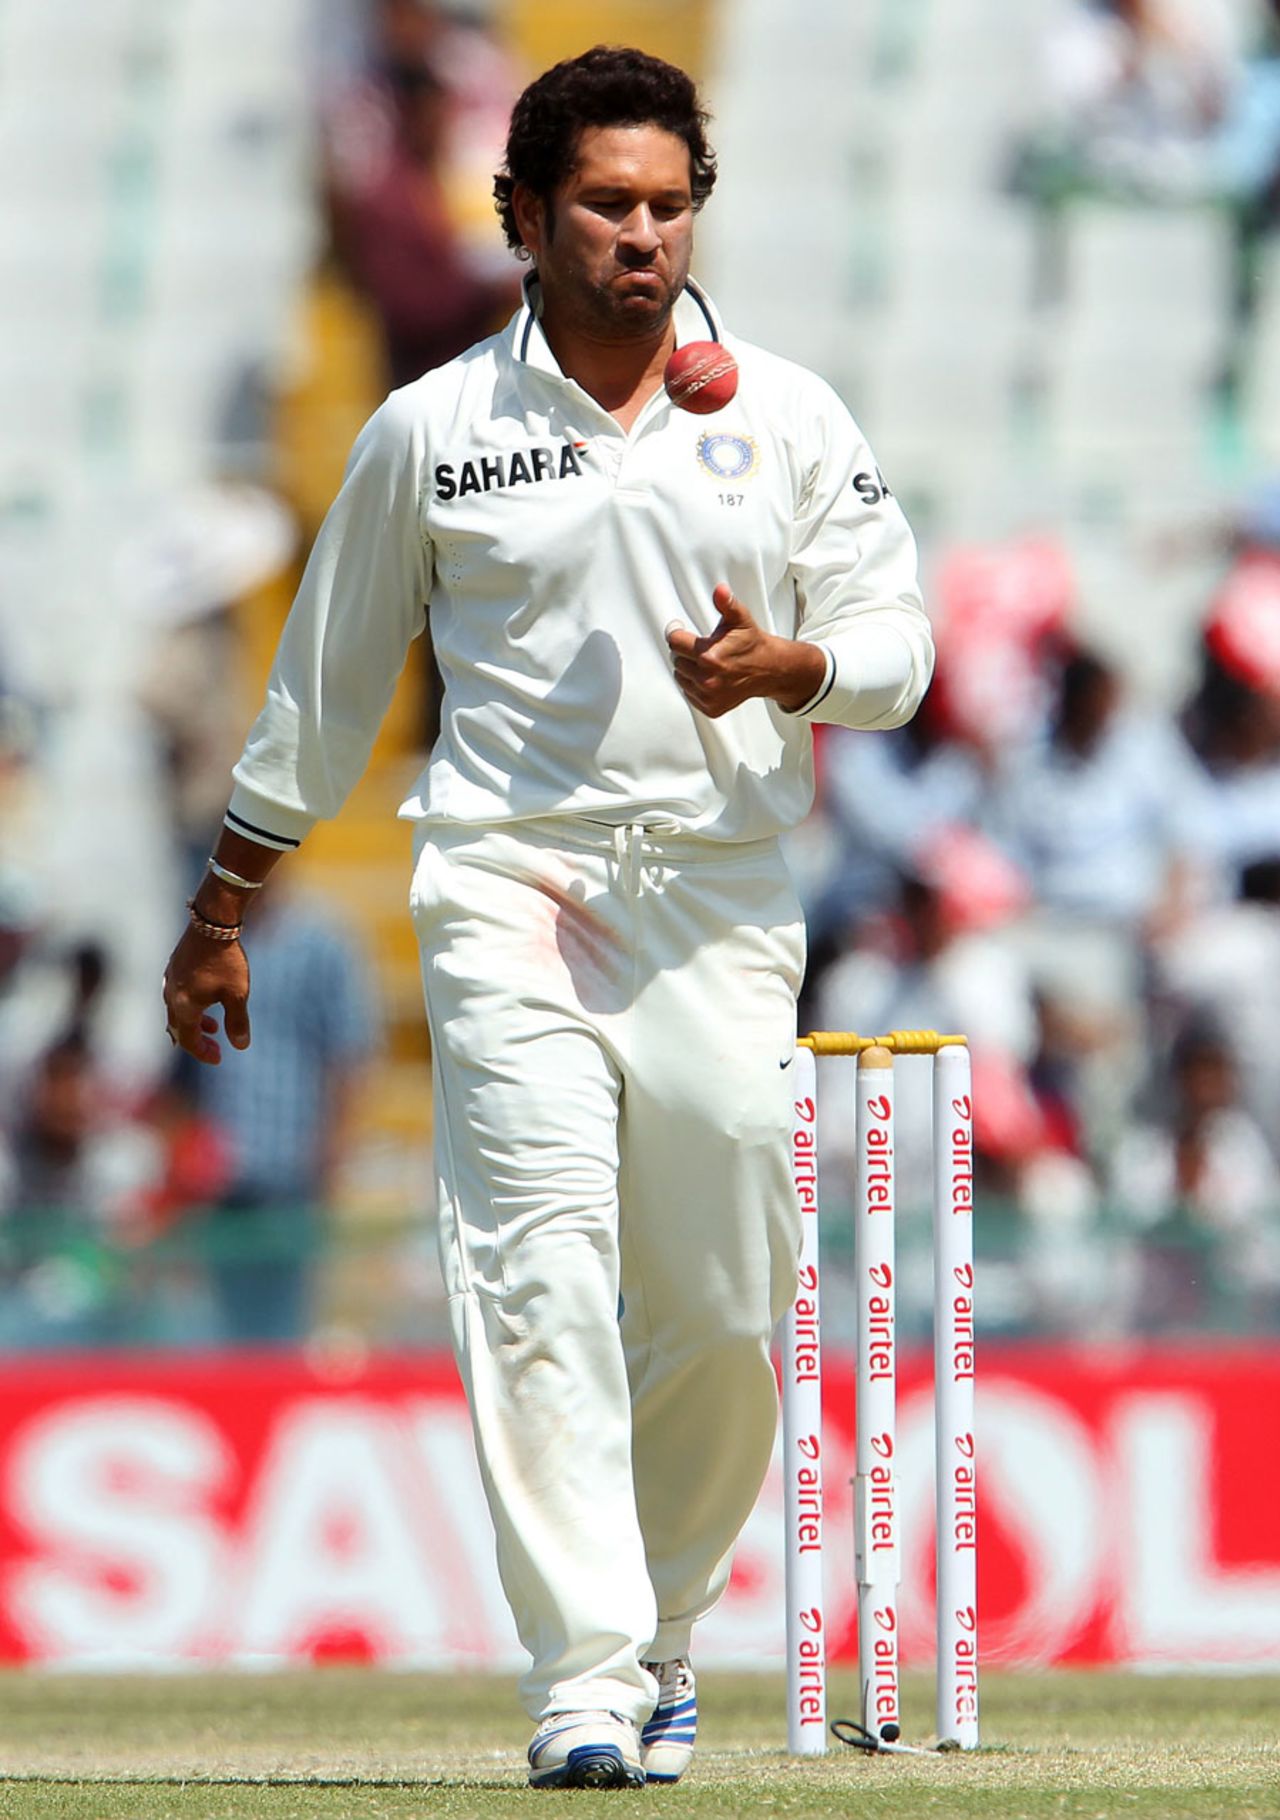 Sachin Tendulkar bowled two overs on the fifth day, India v Australia, 3rd Test, 5th day, Mohali, March 18, 2013